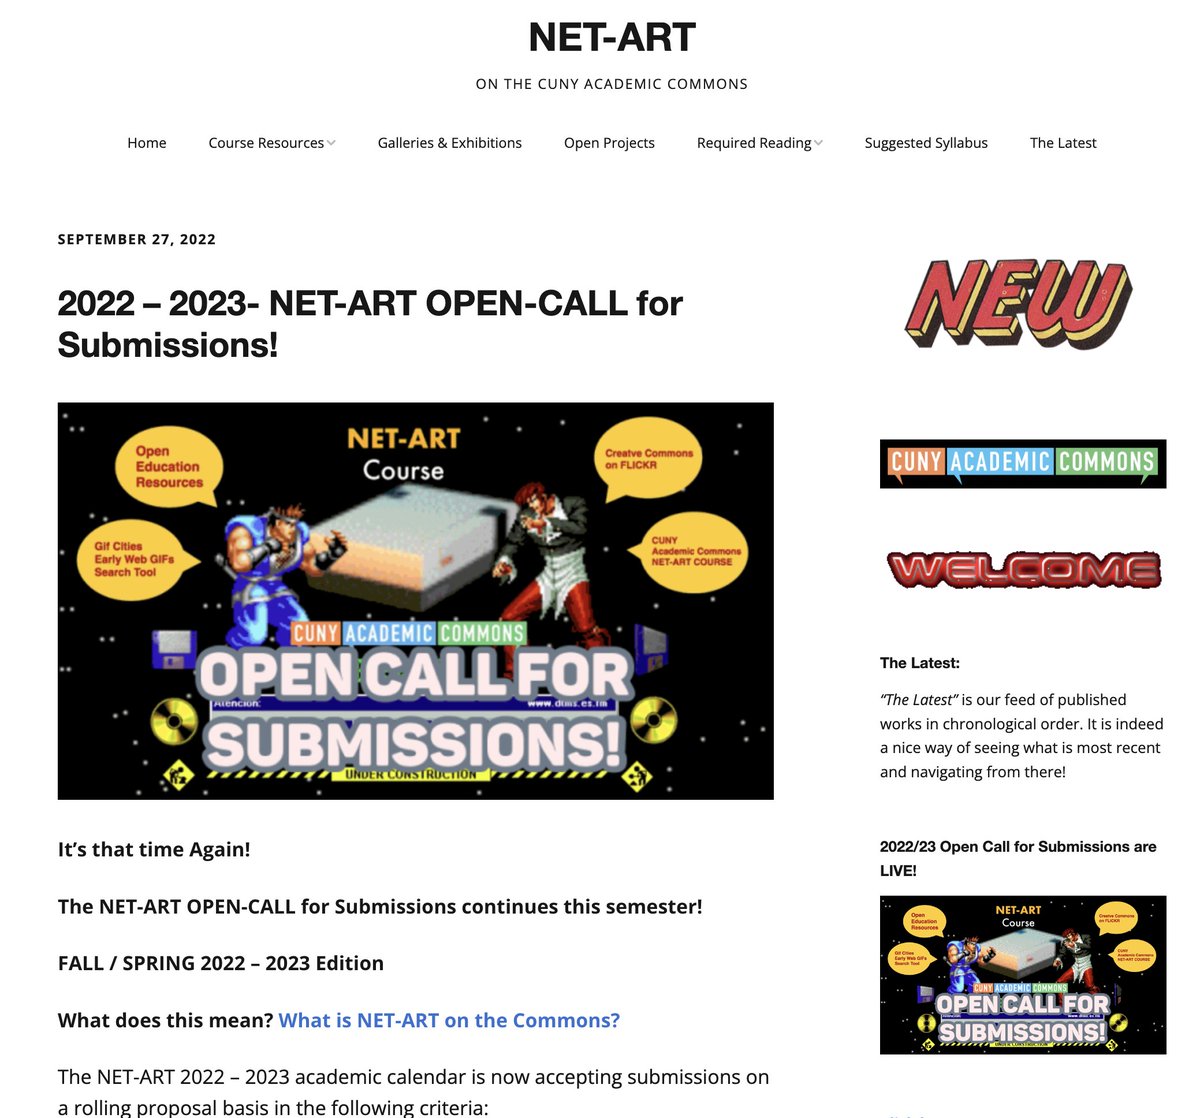 Sharing a few projects via the #netart website on the @cunycommons - New Open Call here ->  netart.commons.gc.cuny.edu/2022/09/27/202… & a new #VideoArt exhibition here -> netart.commons.gc.cuny.edu/2022/09/27/an-… 

Cc: @mkgold @lwaltzer @colinmcd @CityTechOpenLab @CarloDiego